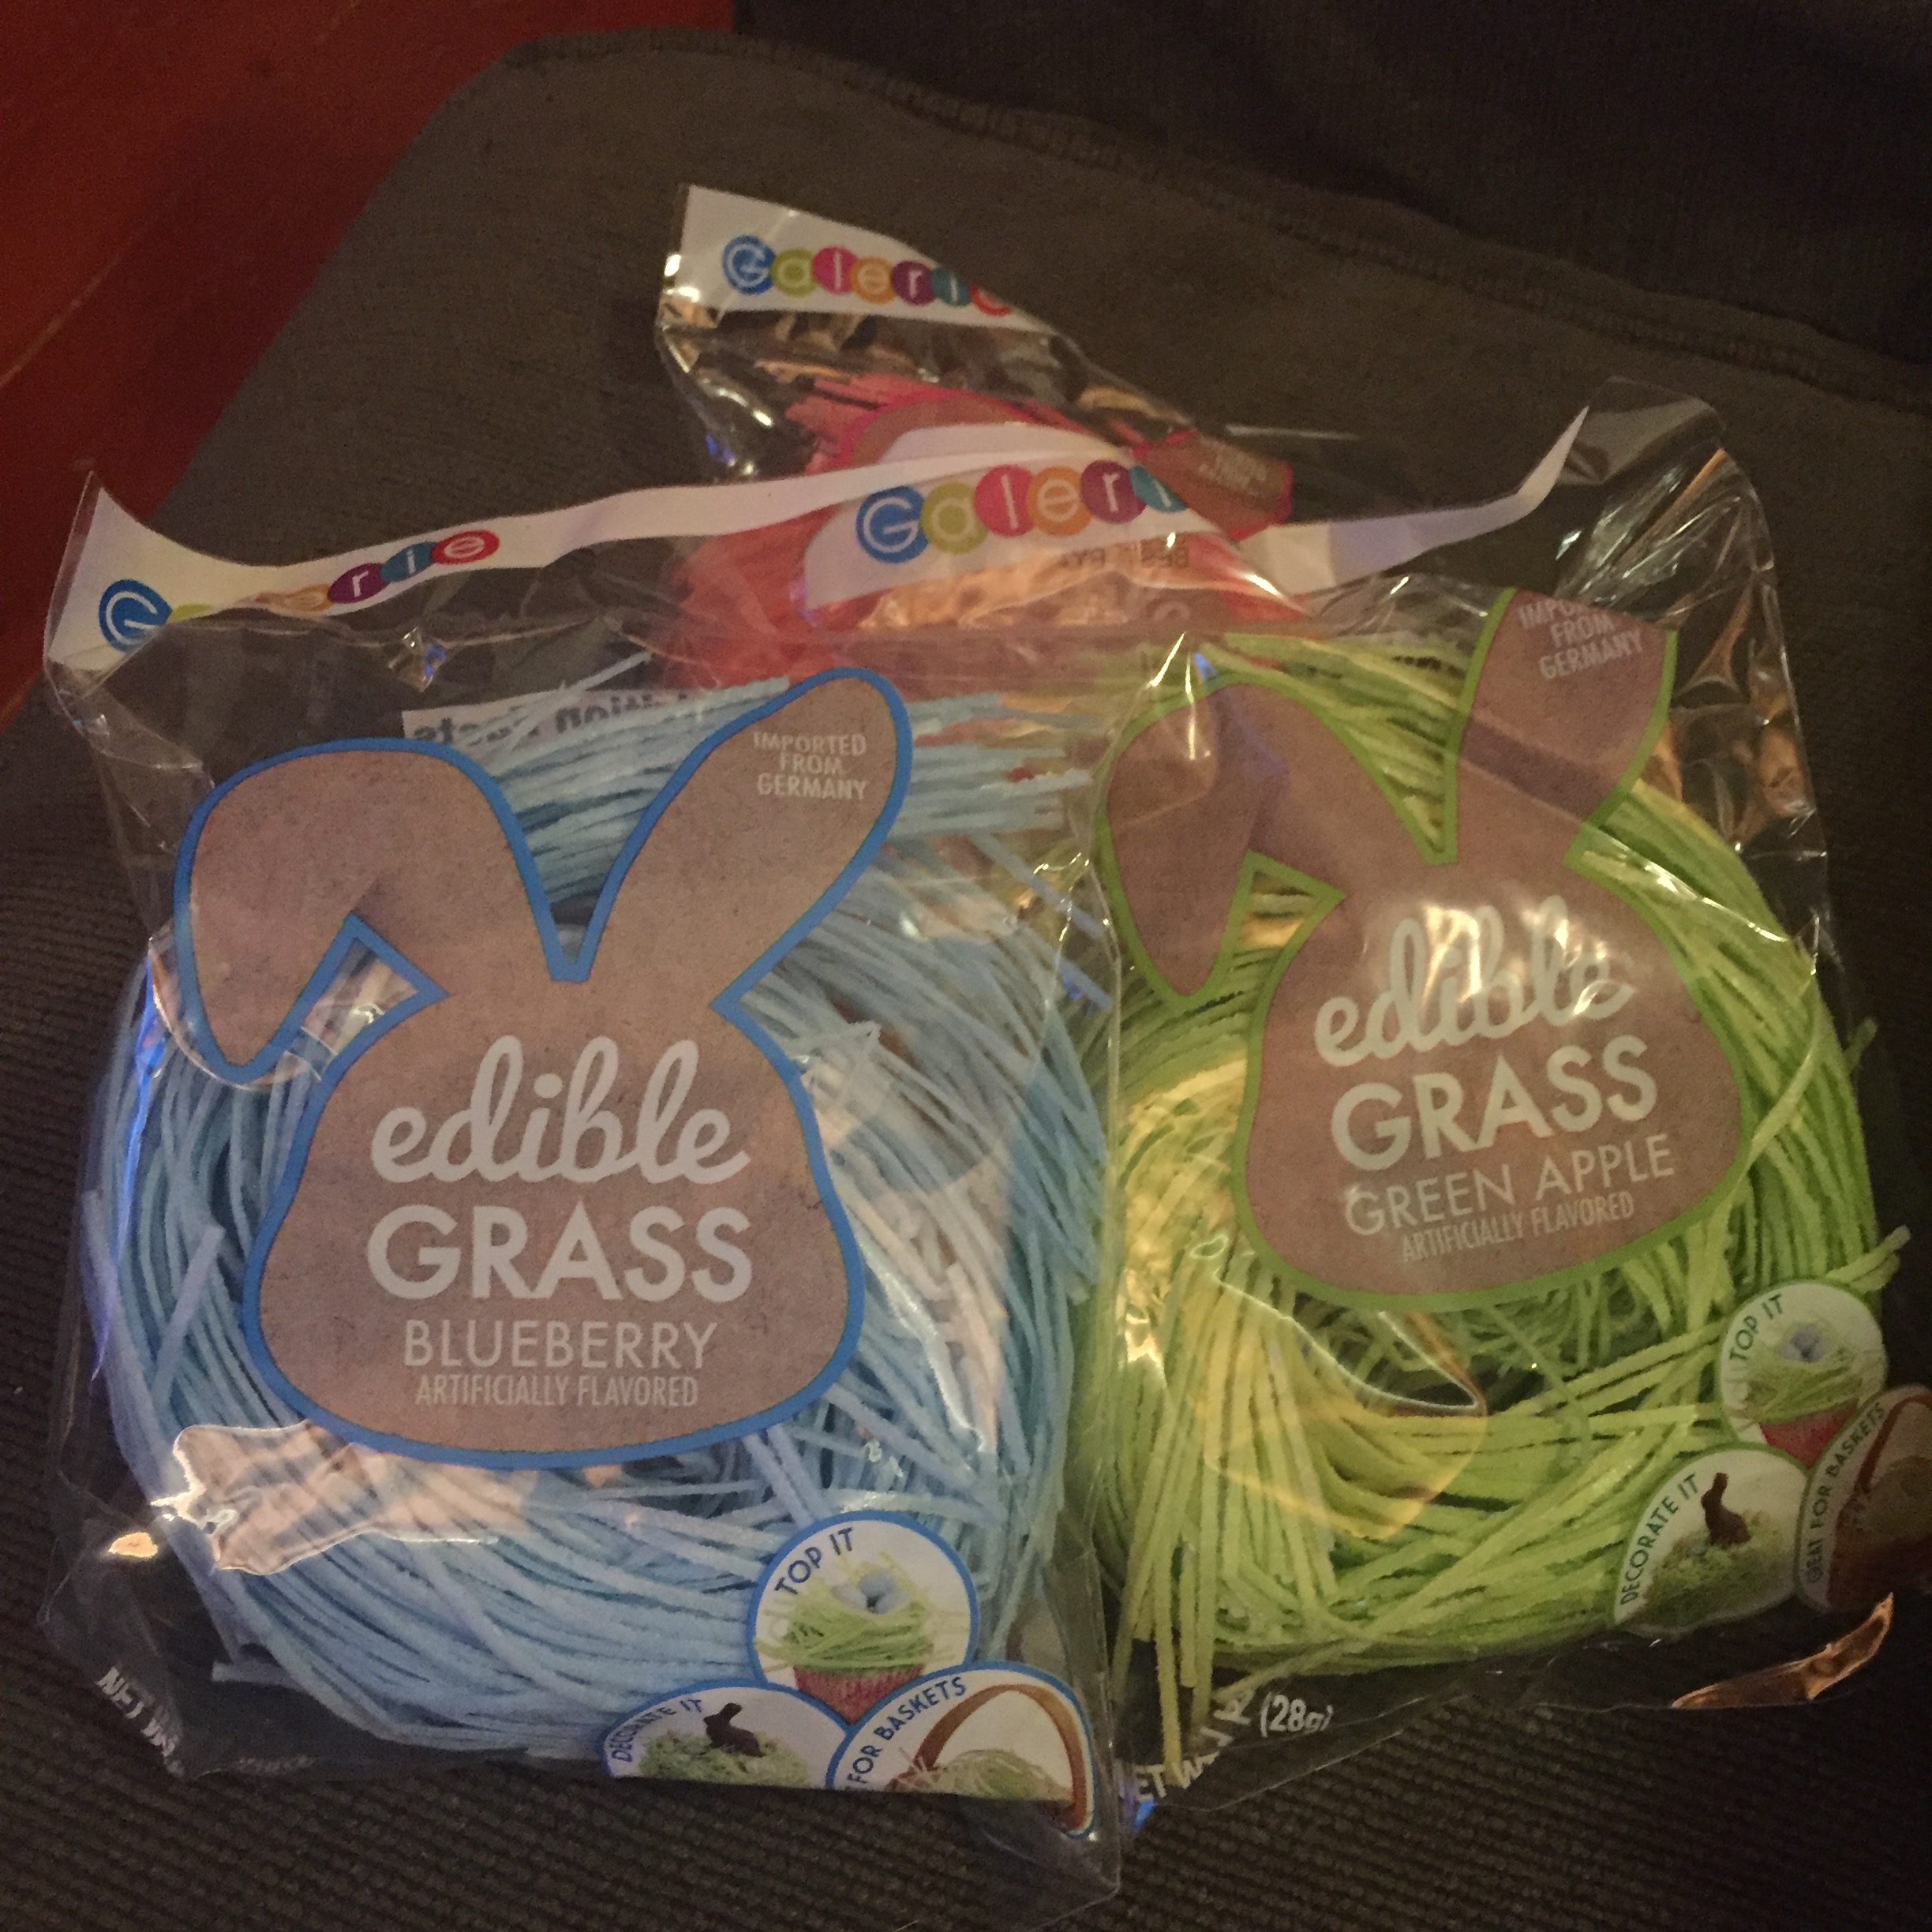 Edible Easter grass in blue, green. and pink colors blueberry green apple and strawberry flavors